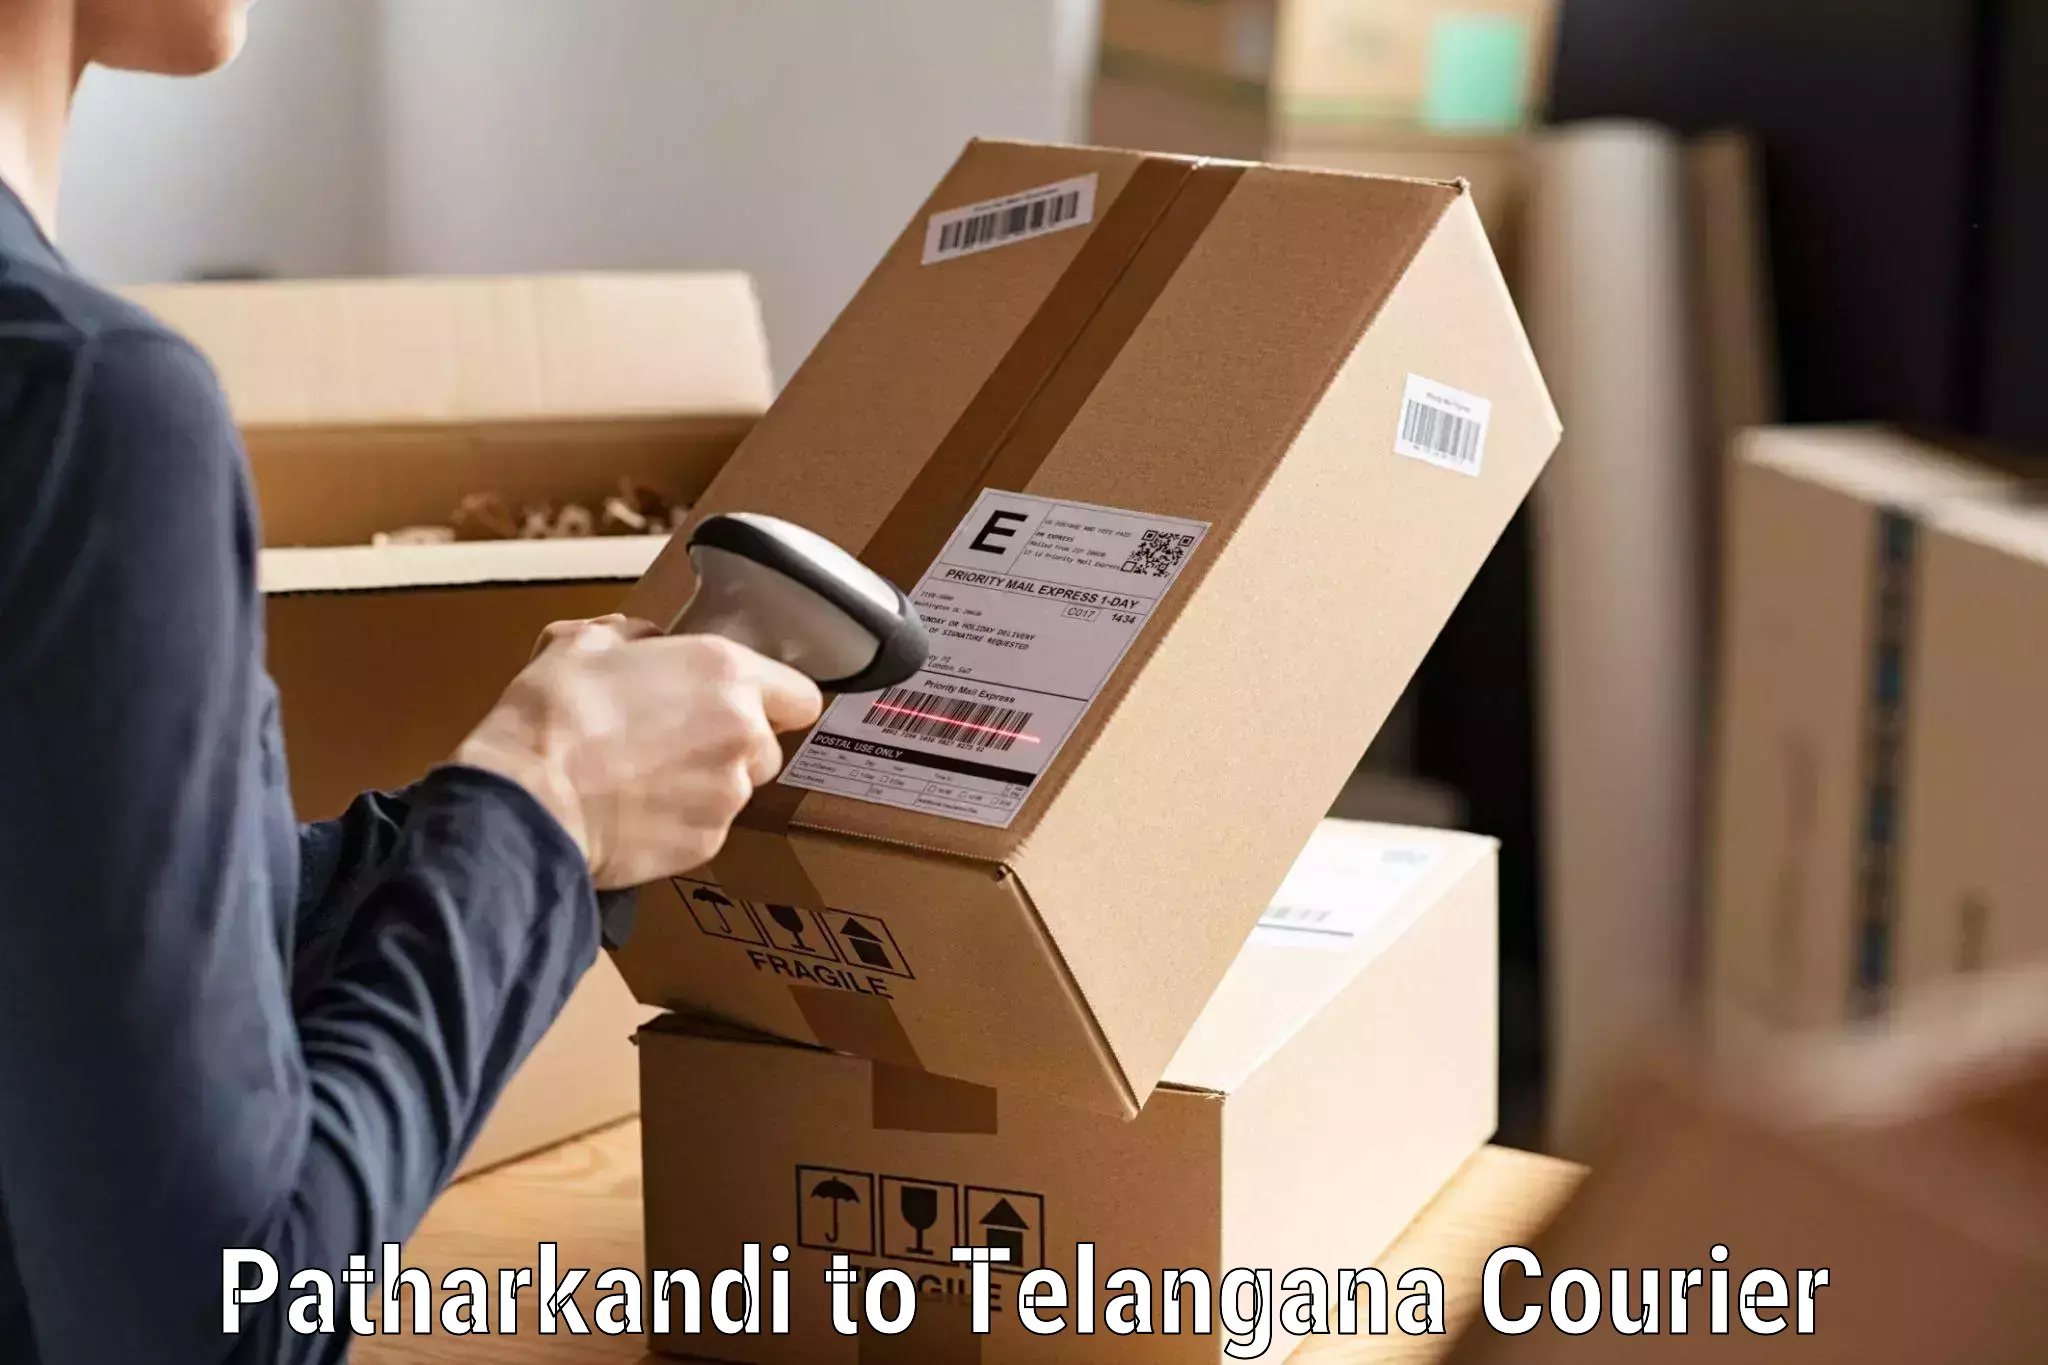 Reliable courier service Patharkandi to Gollapalli